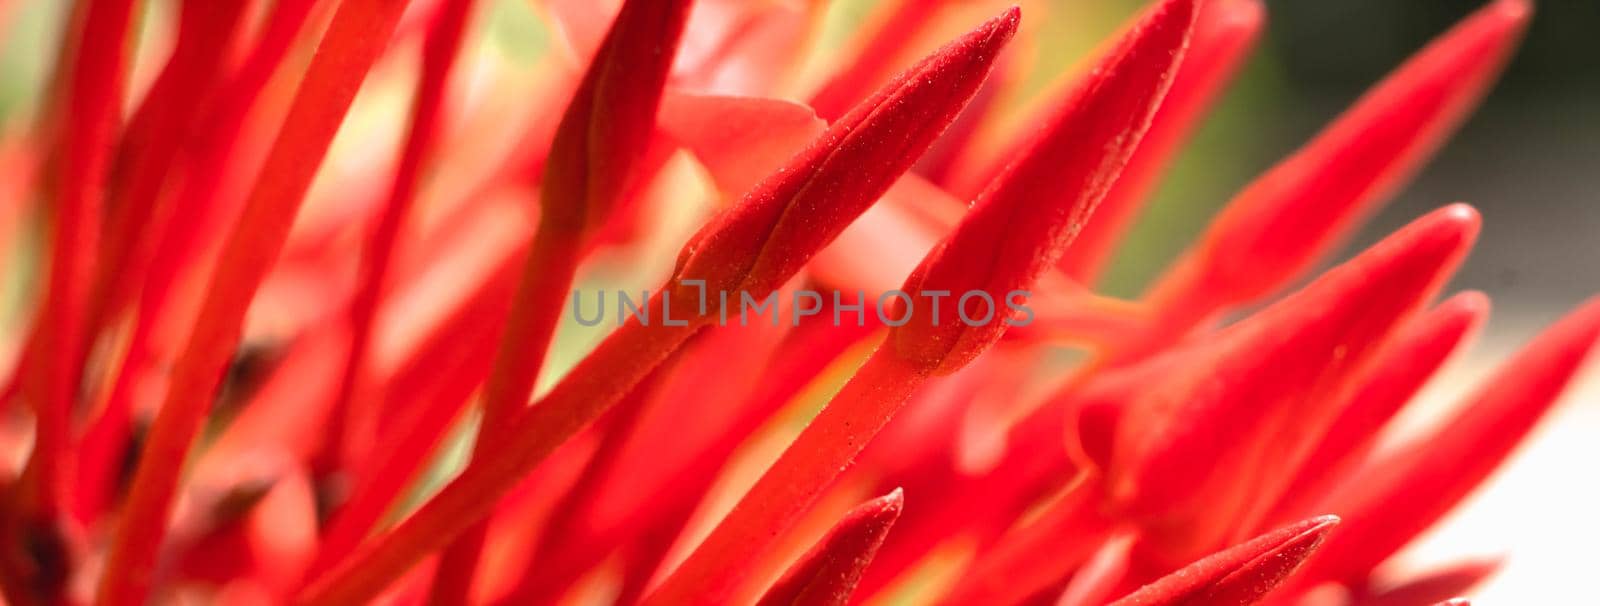 BANNER Macro abstract real beauty nature cute background. Small bright red buds petals bloom of Santan Ixora Jungle Geranium flower garden plant, sharp needles. Floral botanic design decor More stock by nandrey85